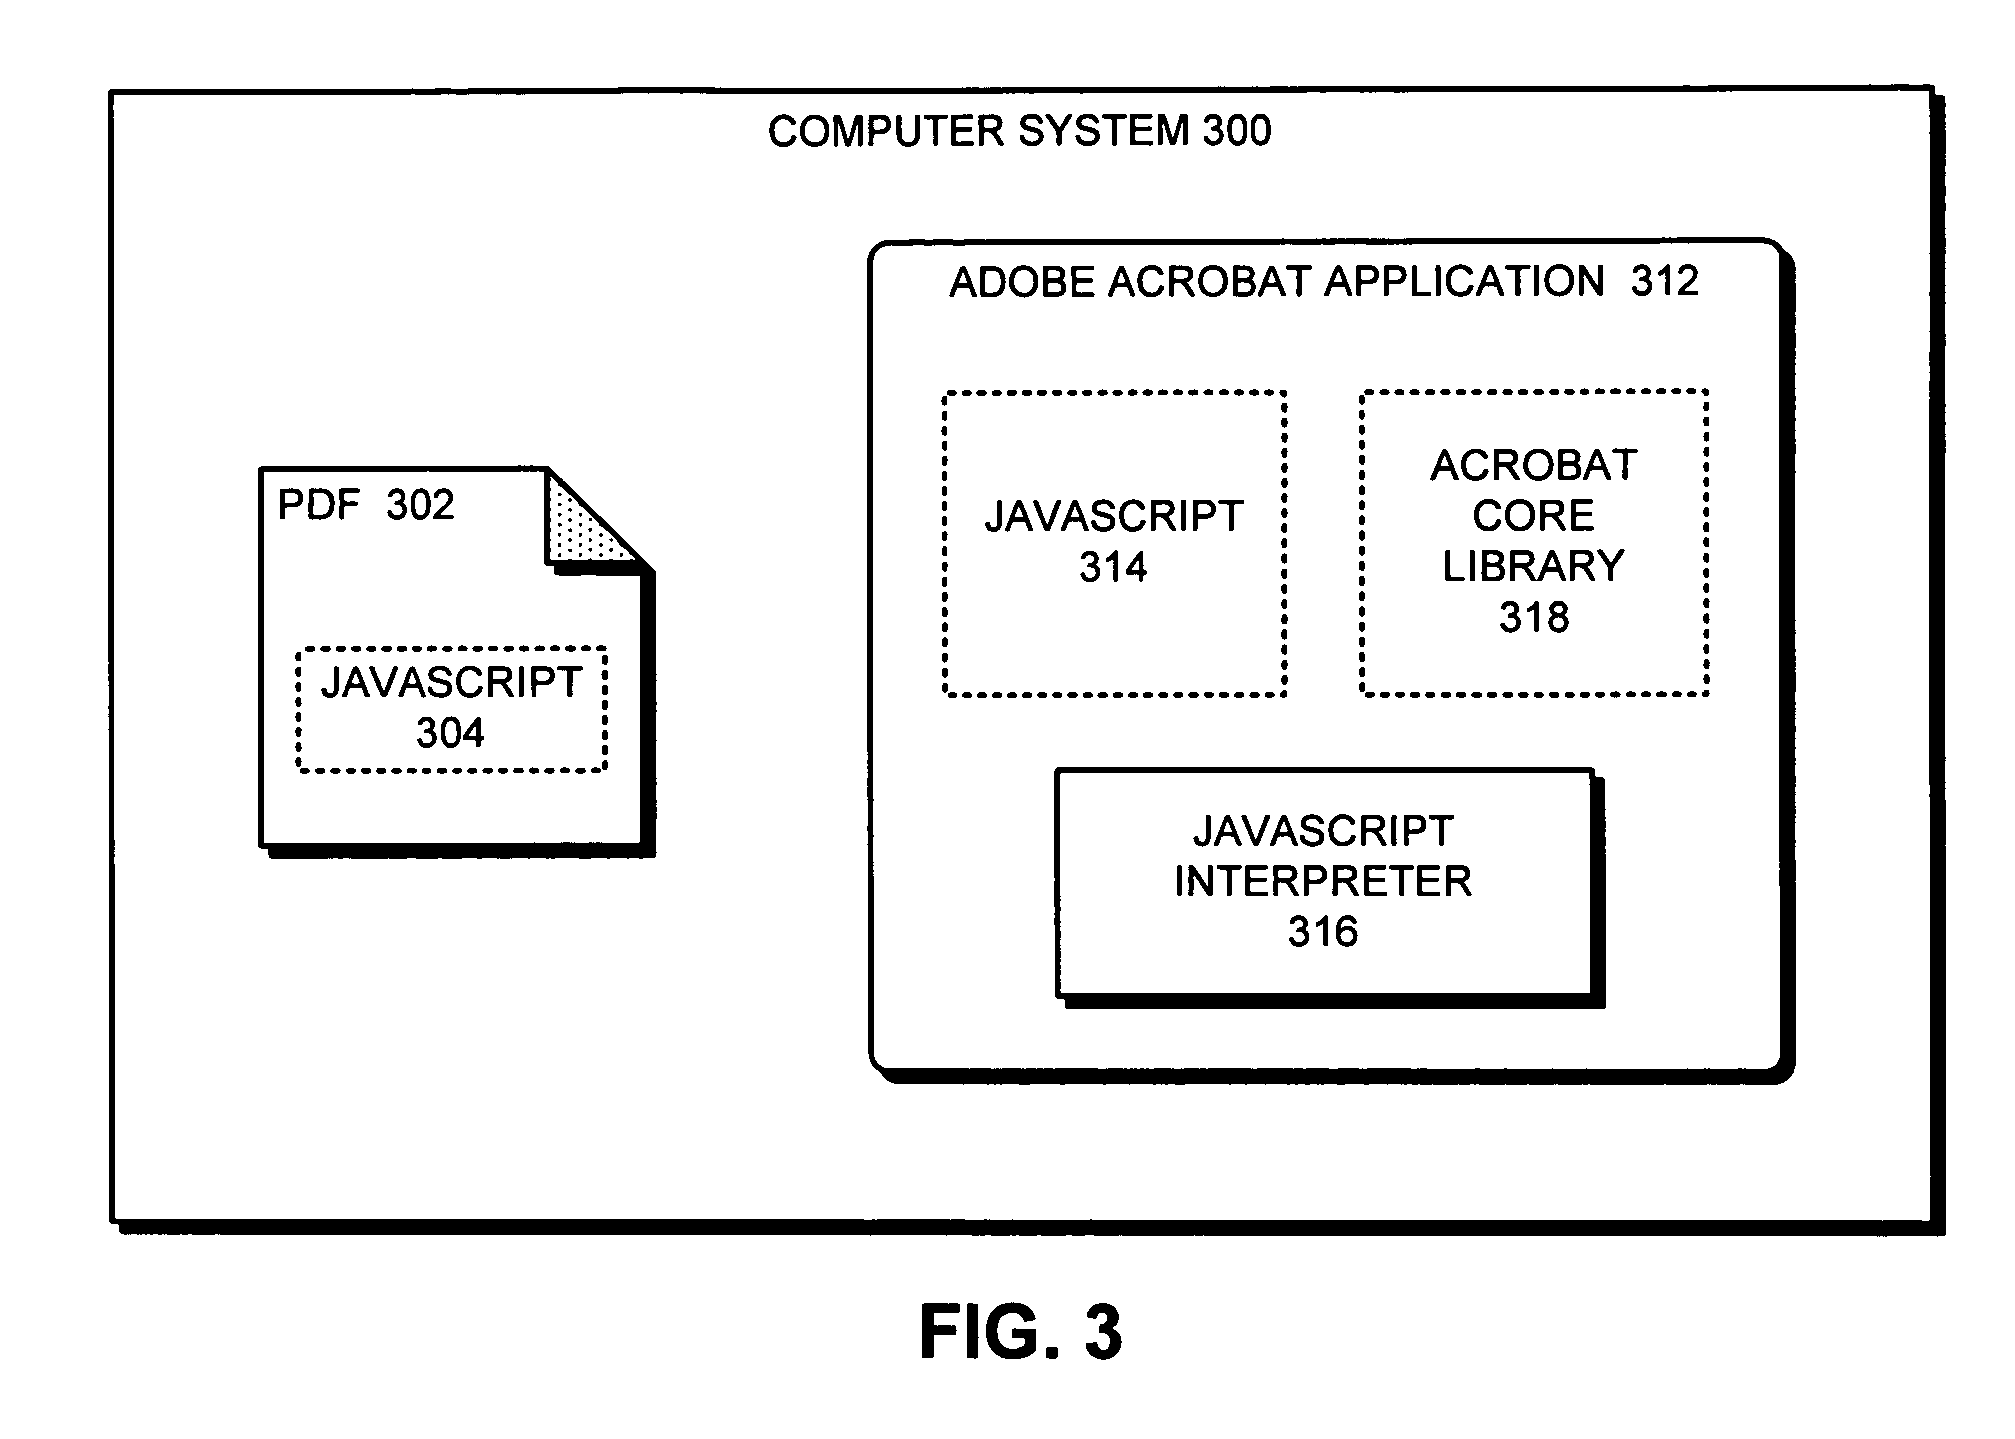 Method and apparatus for secure execution of code